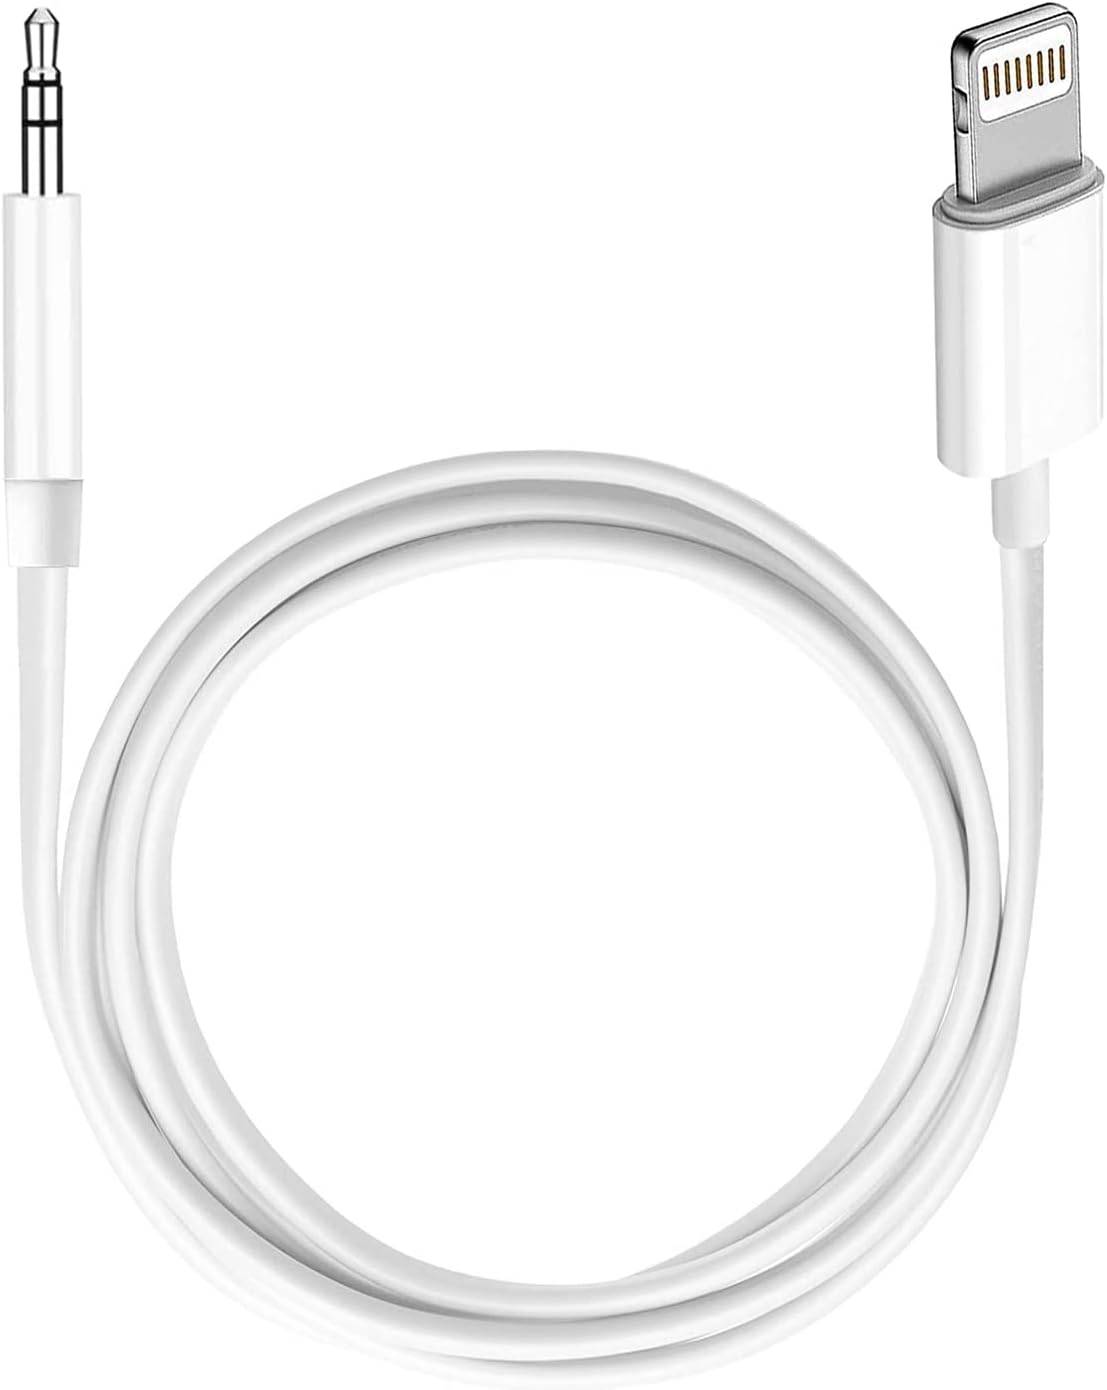 StarTech.com USB C to Lightning Cable 20in / 50cm, MFi Certified